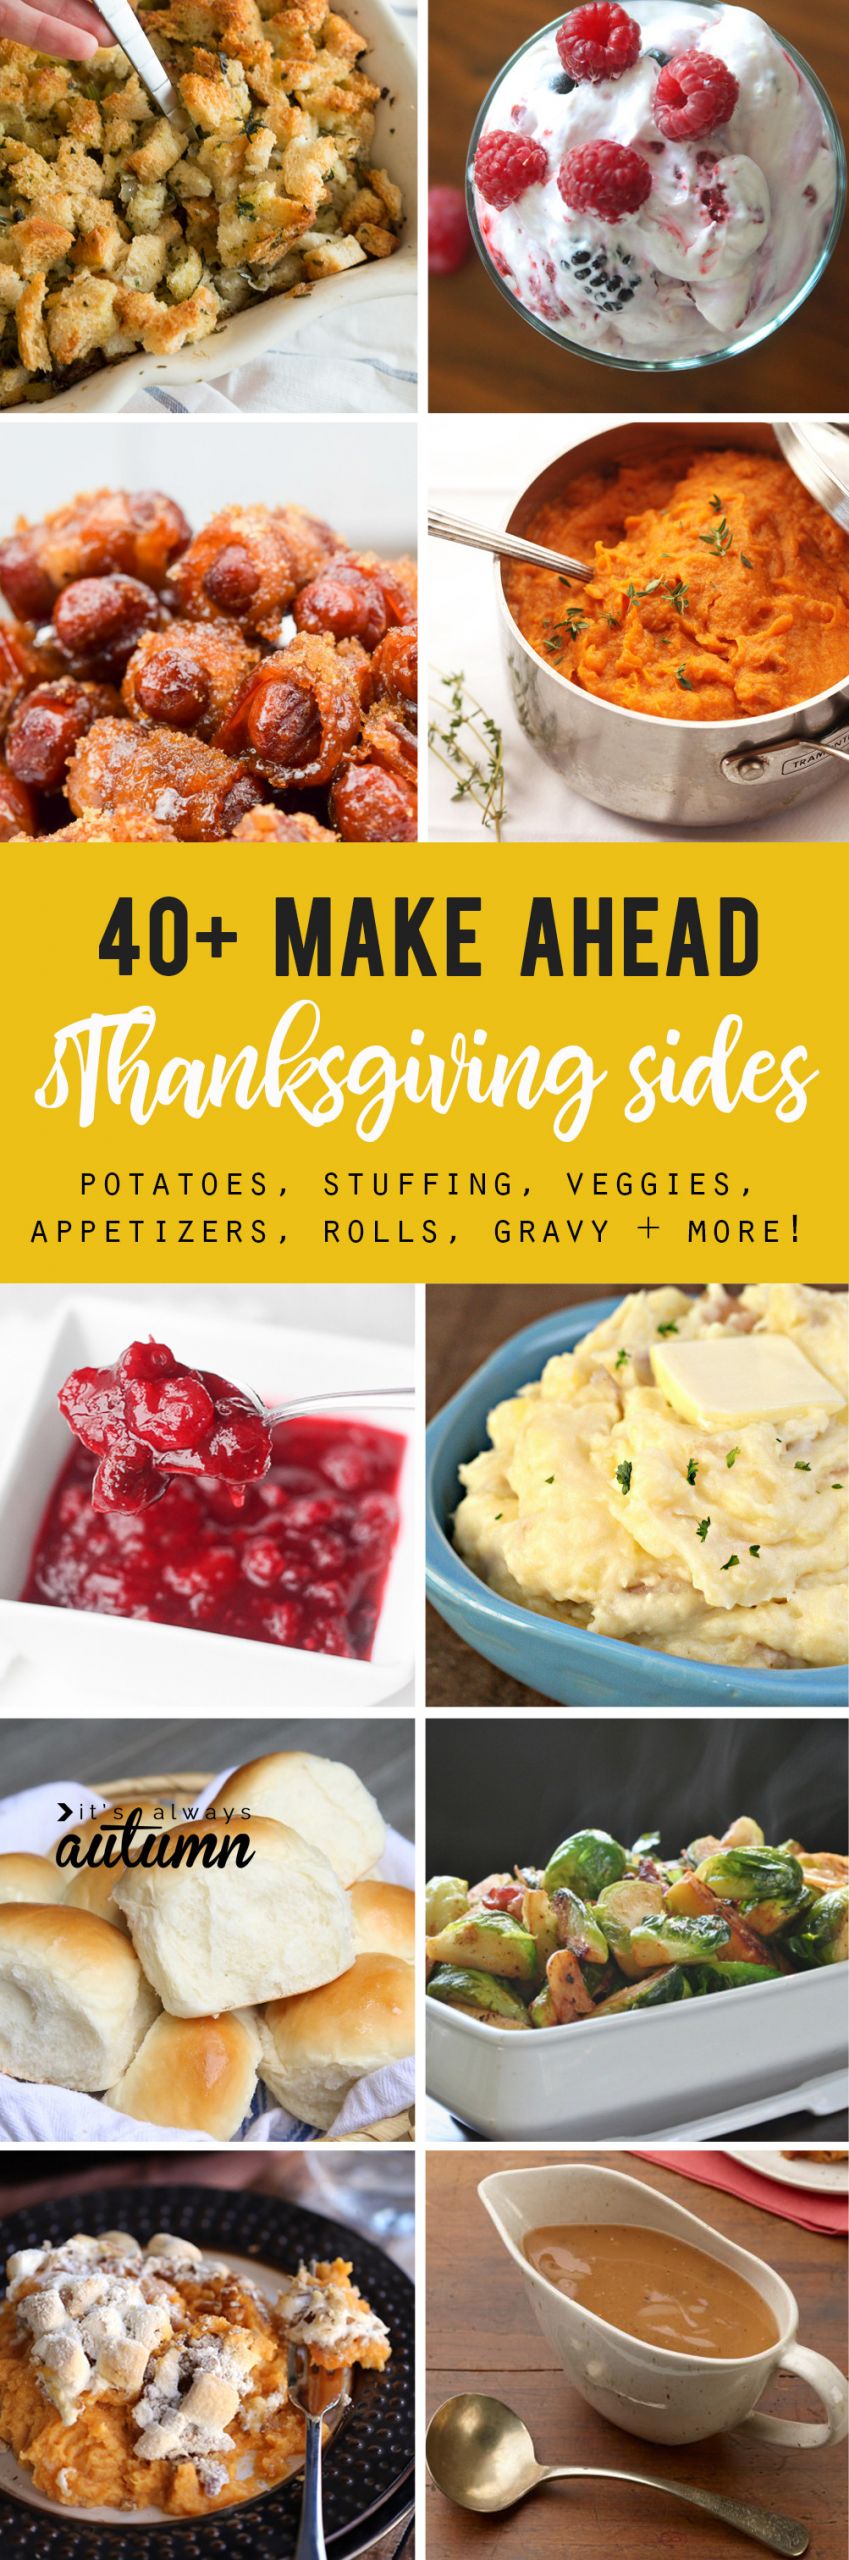 Thanksgiving Vegetables Make Ahead
 the BEST LIST of Thanksgiving side dishes you can make